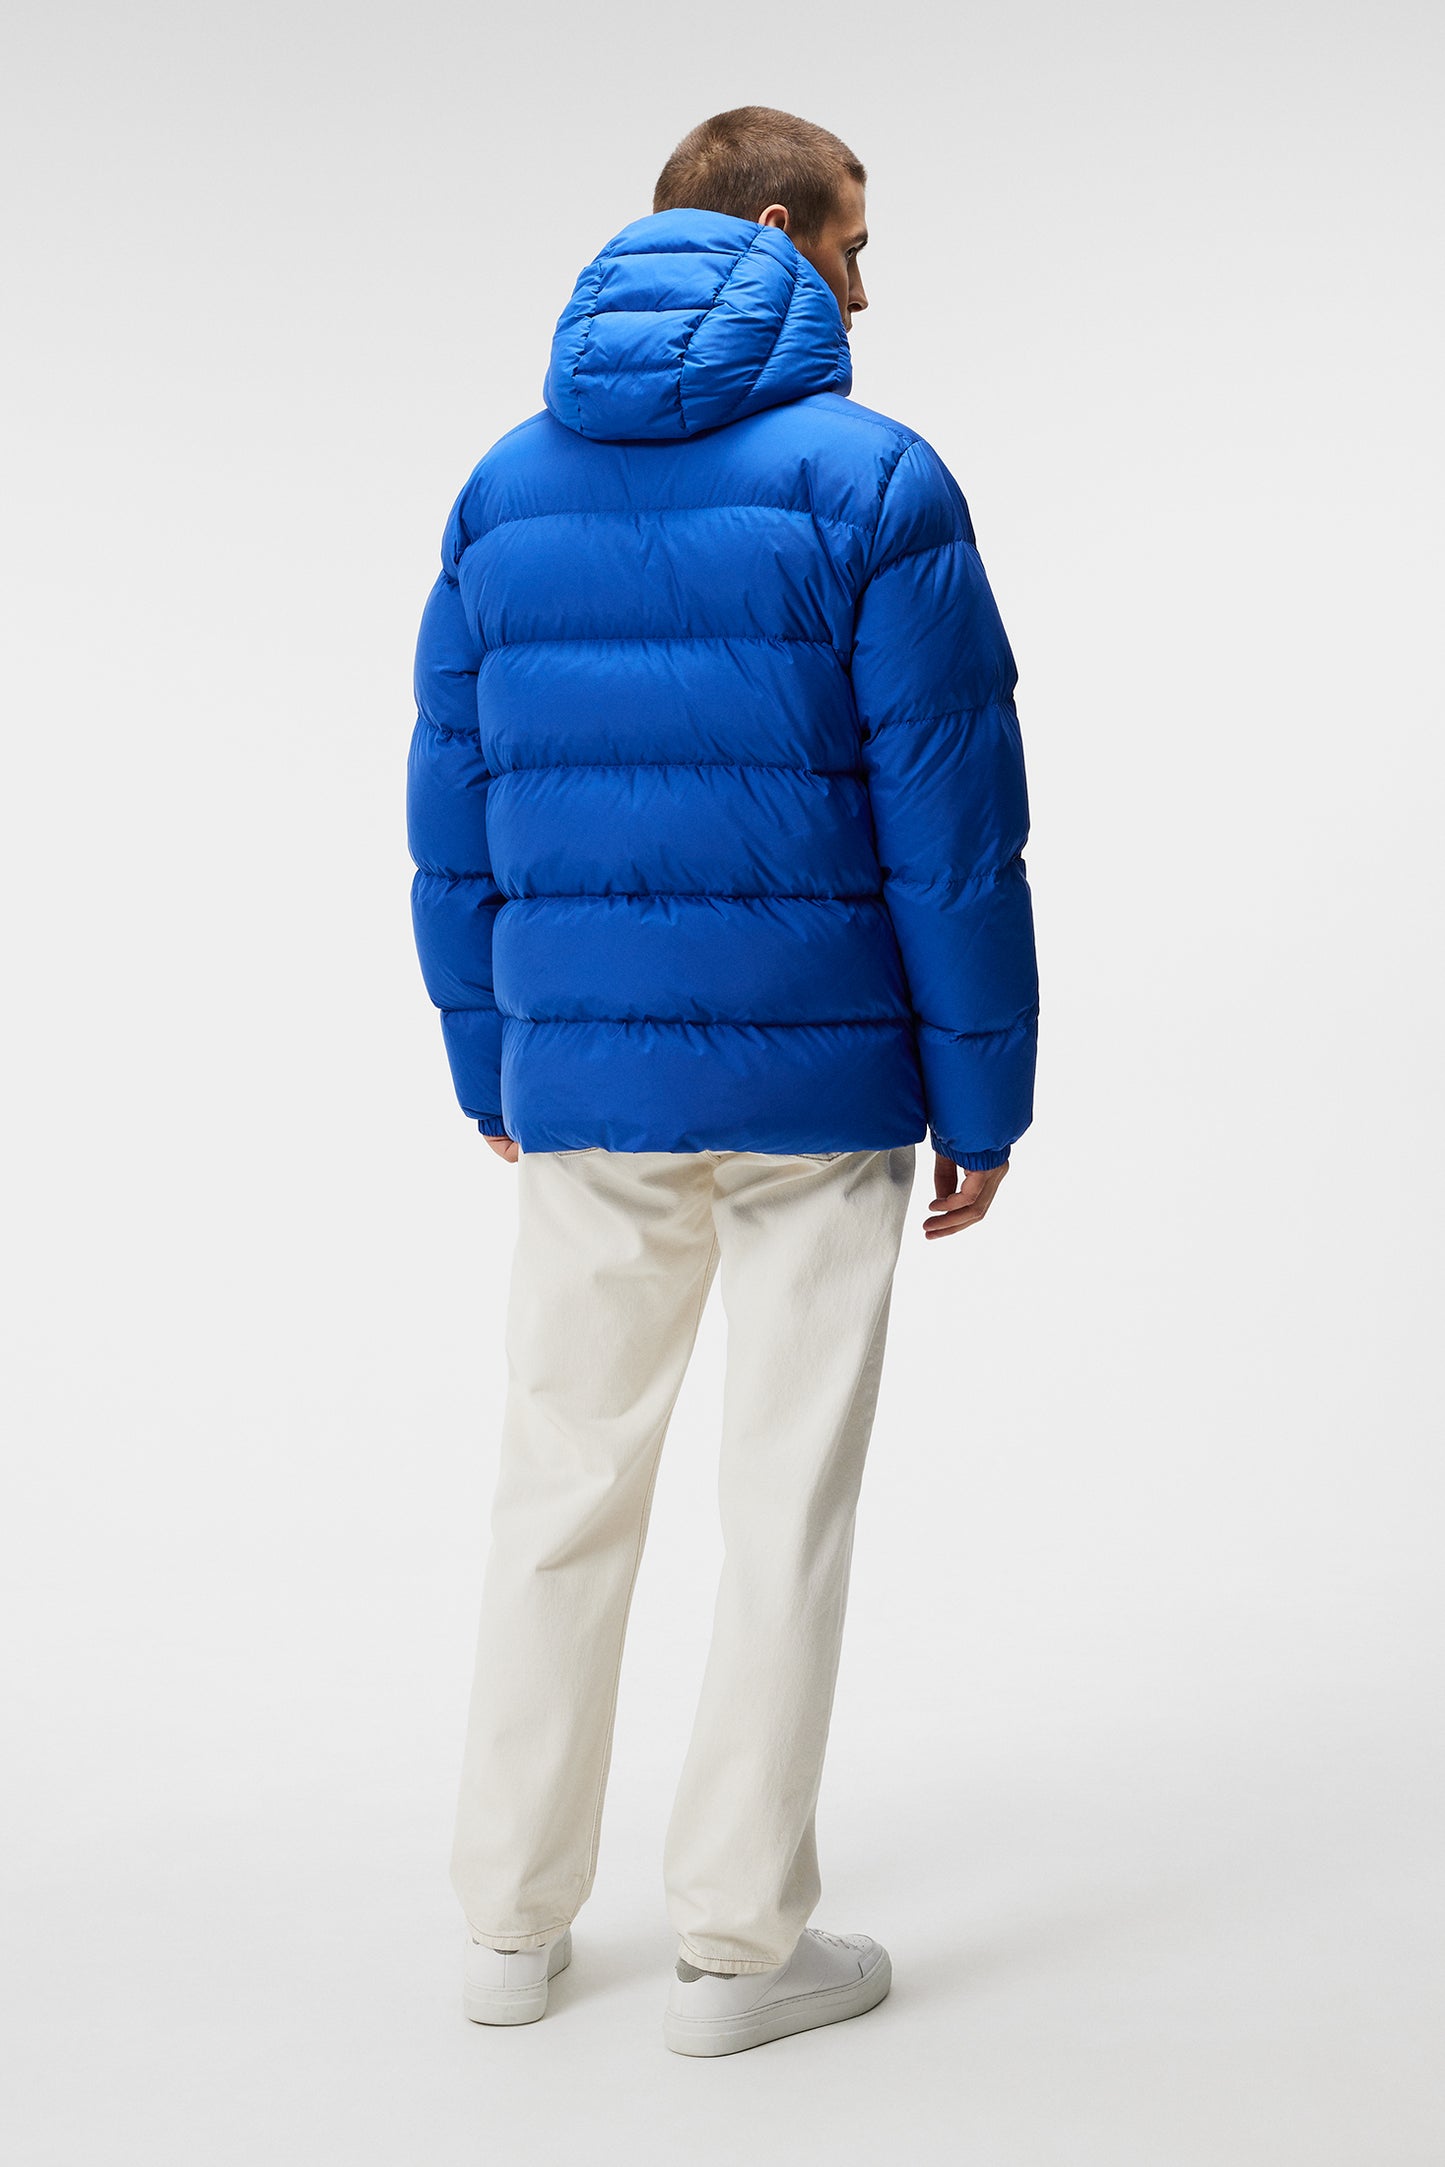 Barrell Down Jacket / Surf the Web